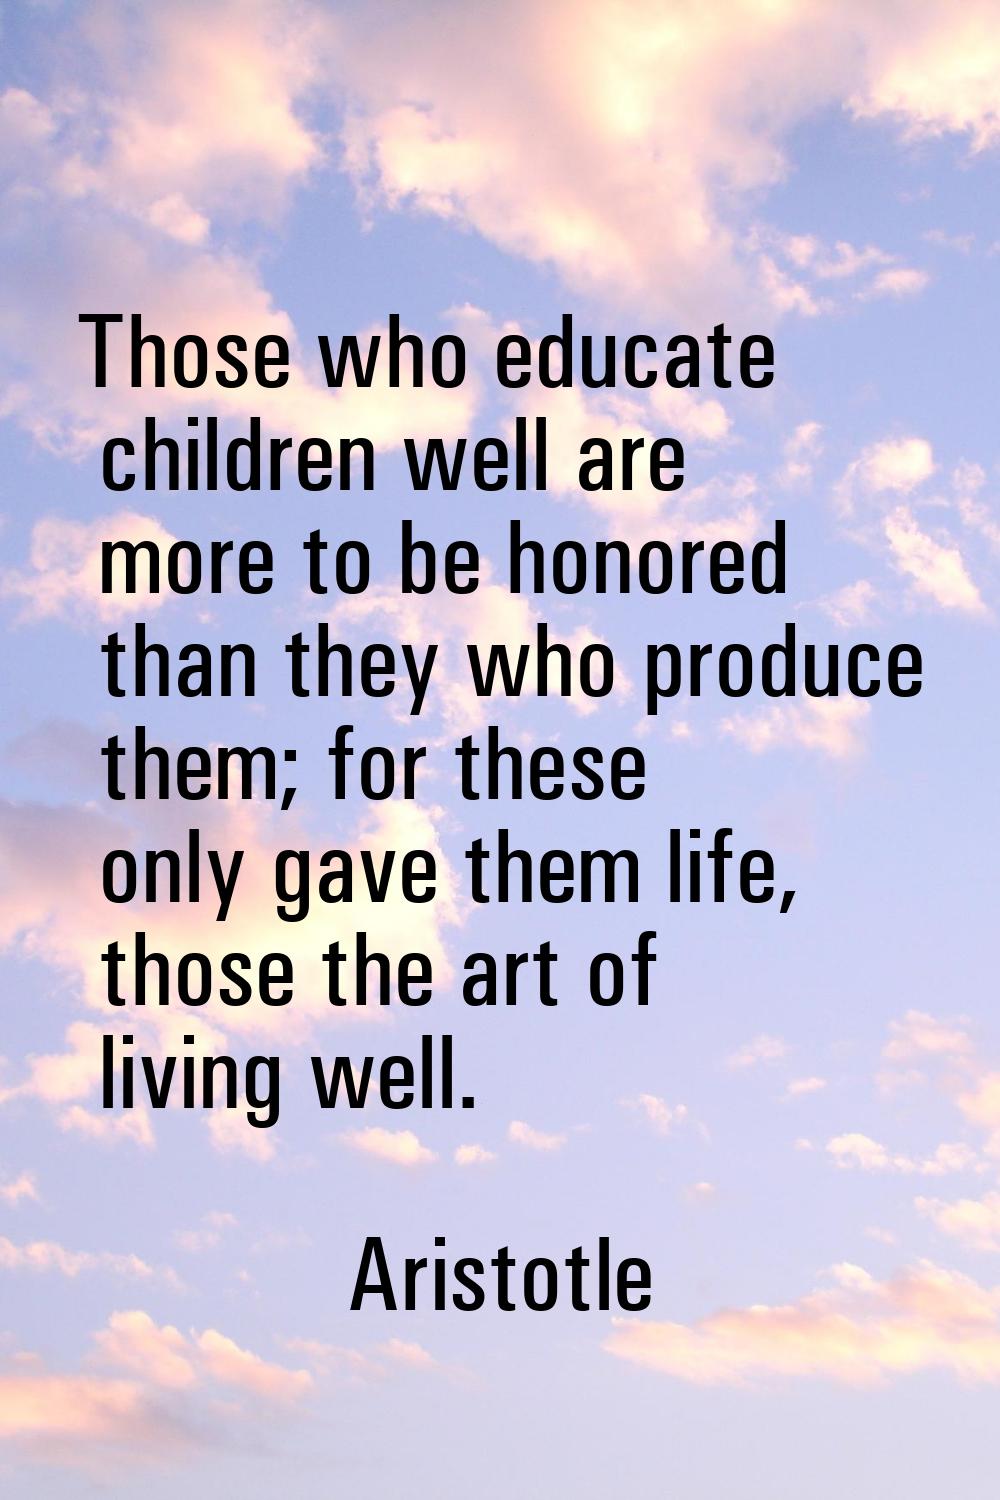 Those who educate children well are more to be honored than they who produce them; for these only g